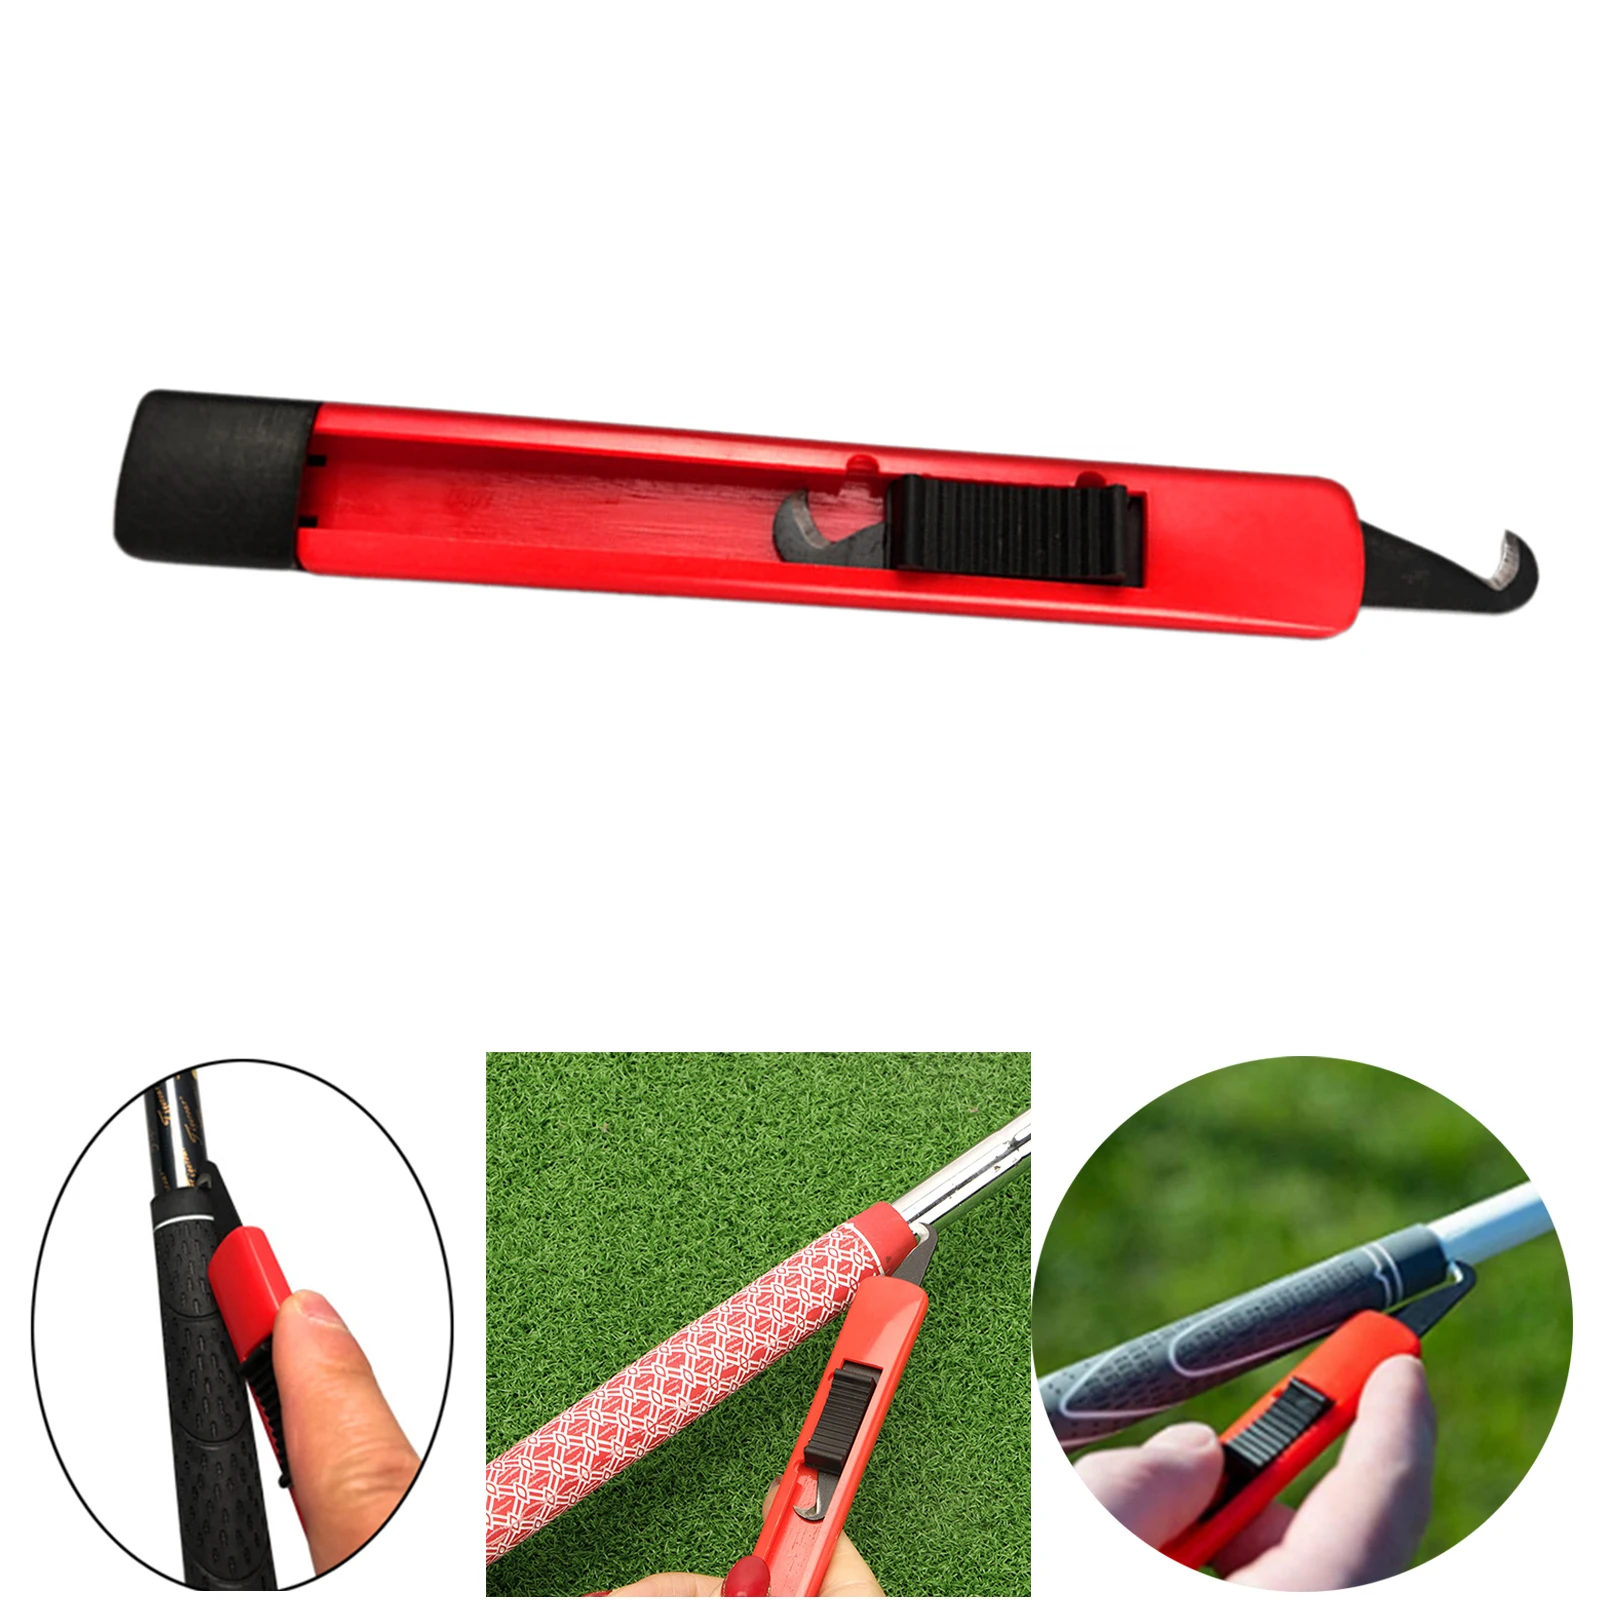 Golf Club Grip Change Regrip Remover Tool Accessory Carbon Steel Plastic Grip,Golf Grip Kits for Regripping Golf Clubs